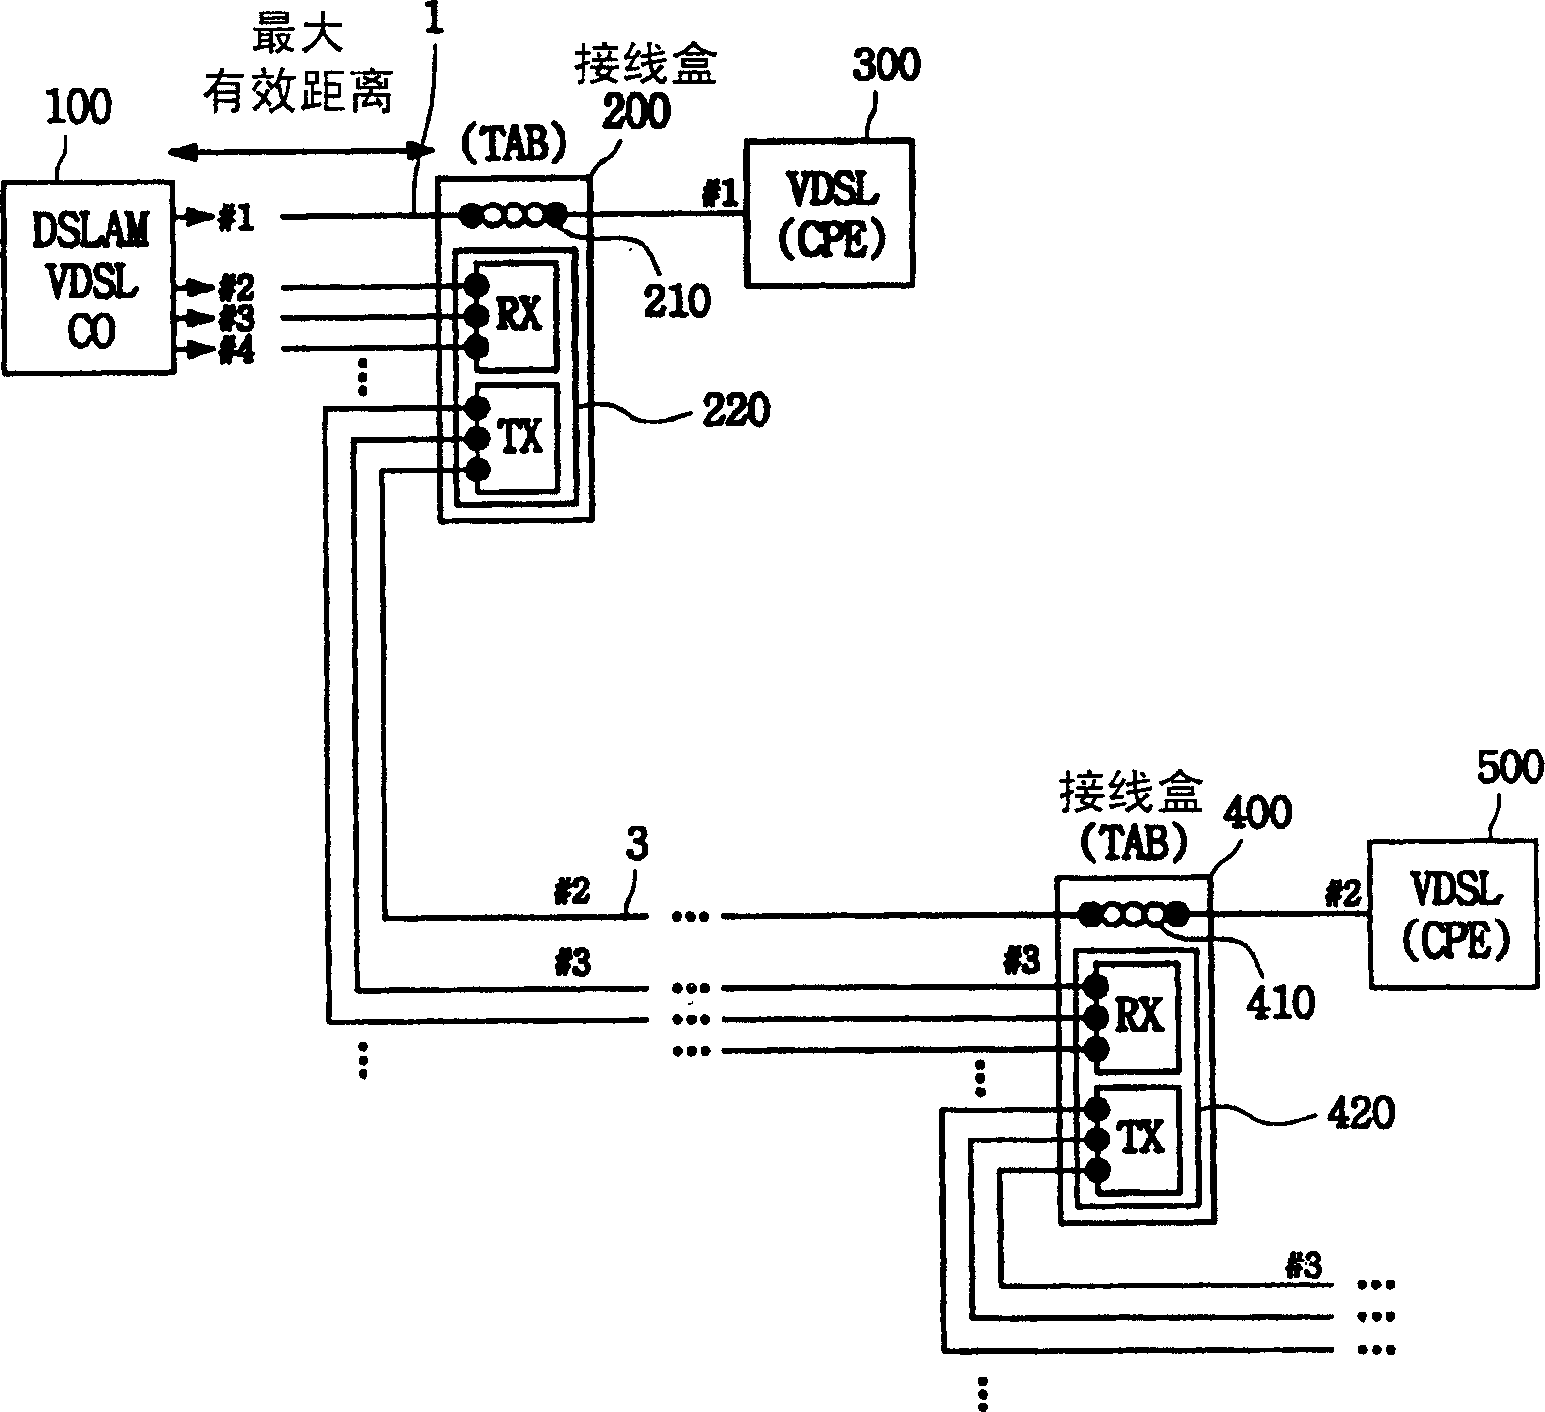 System for extending distance of x digital subscriber line using reserved telephone line